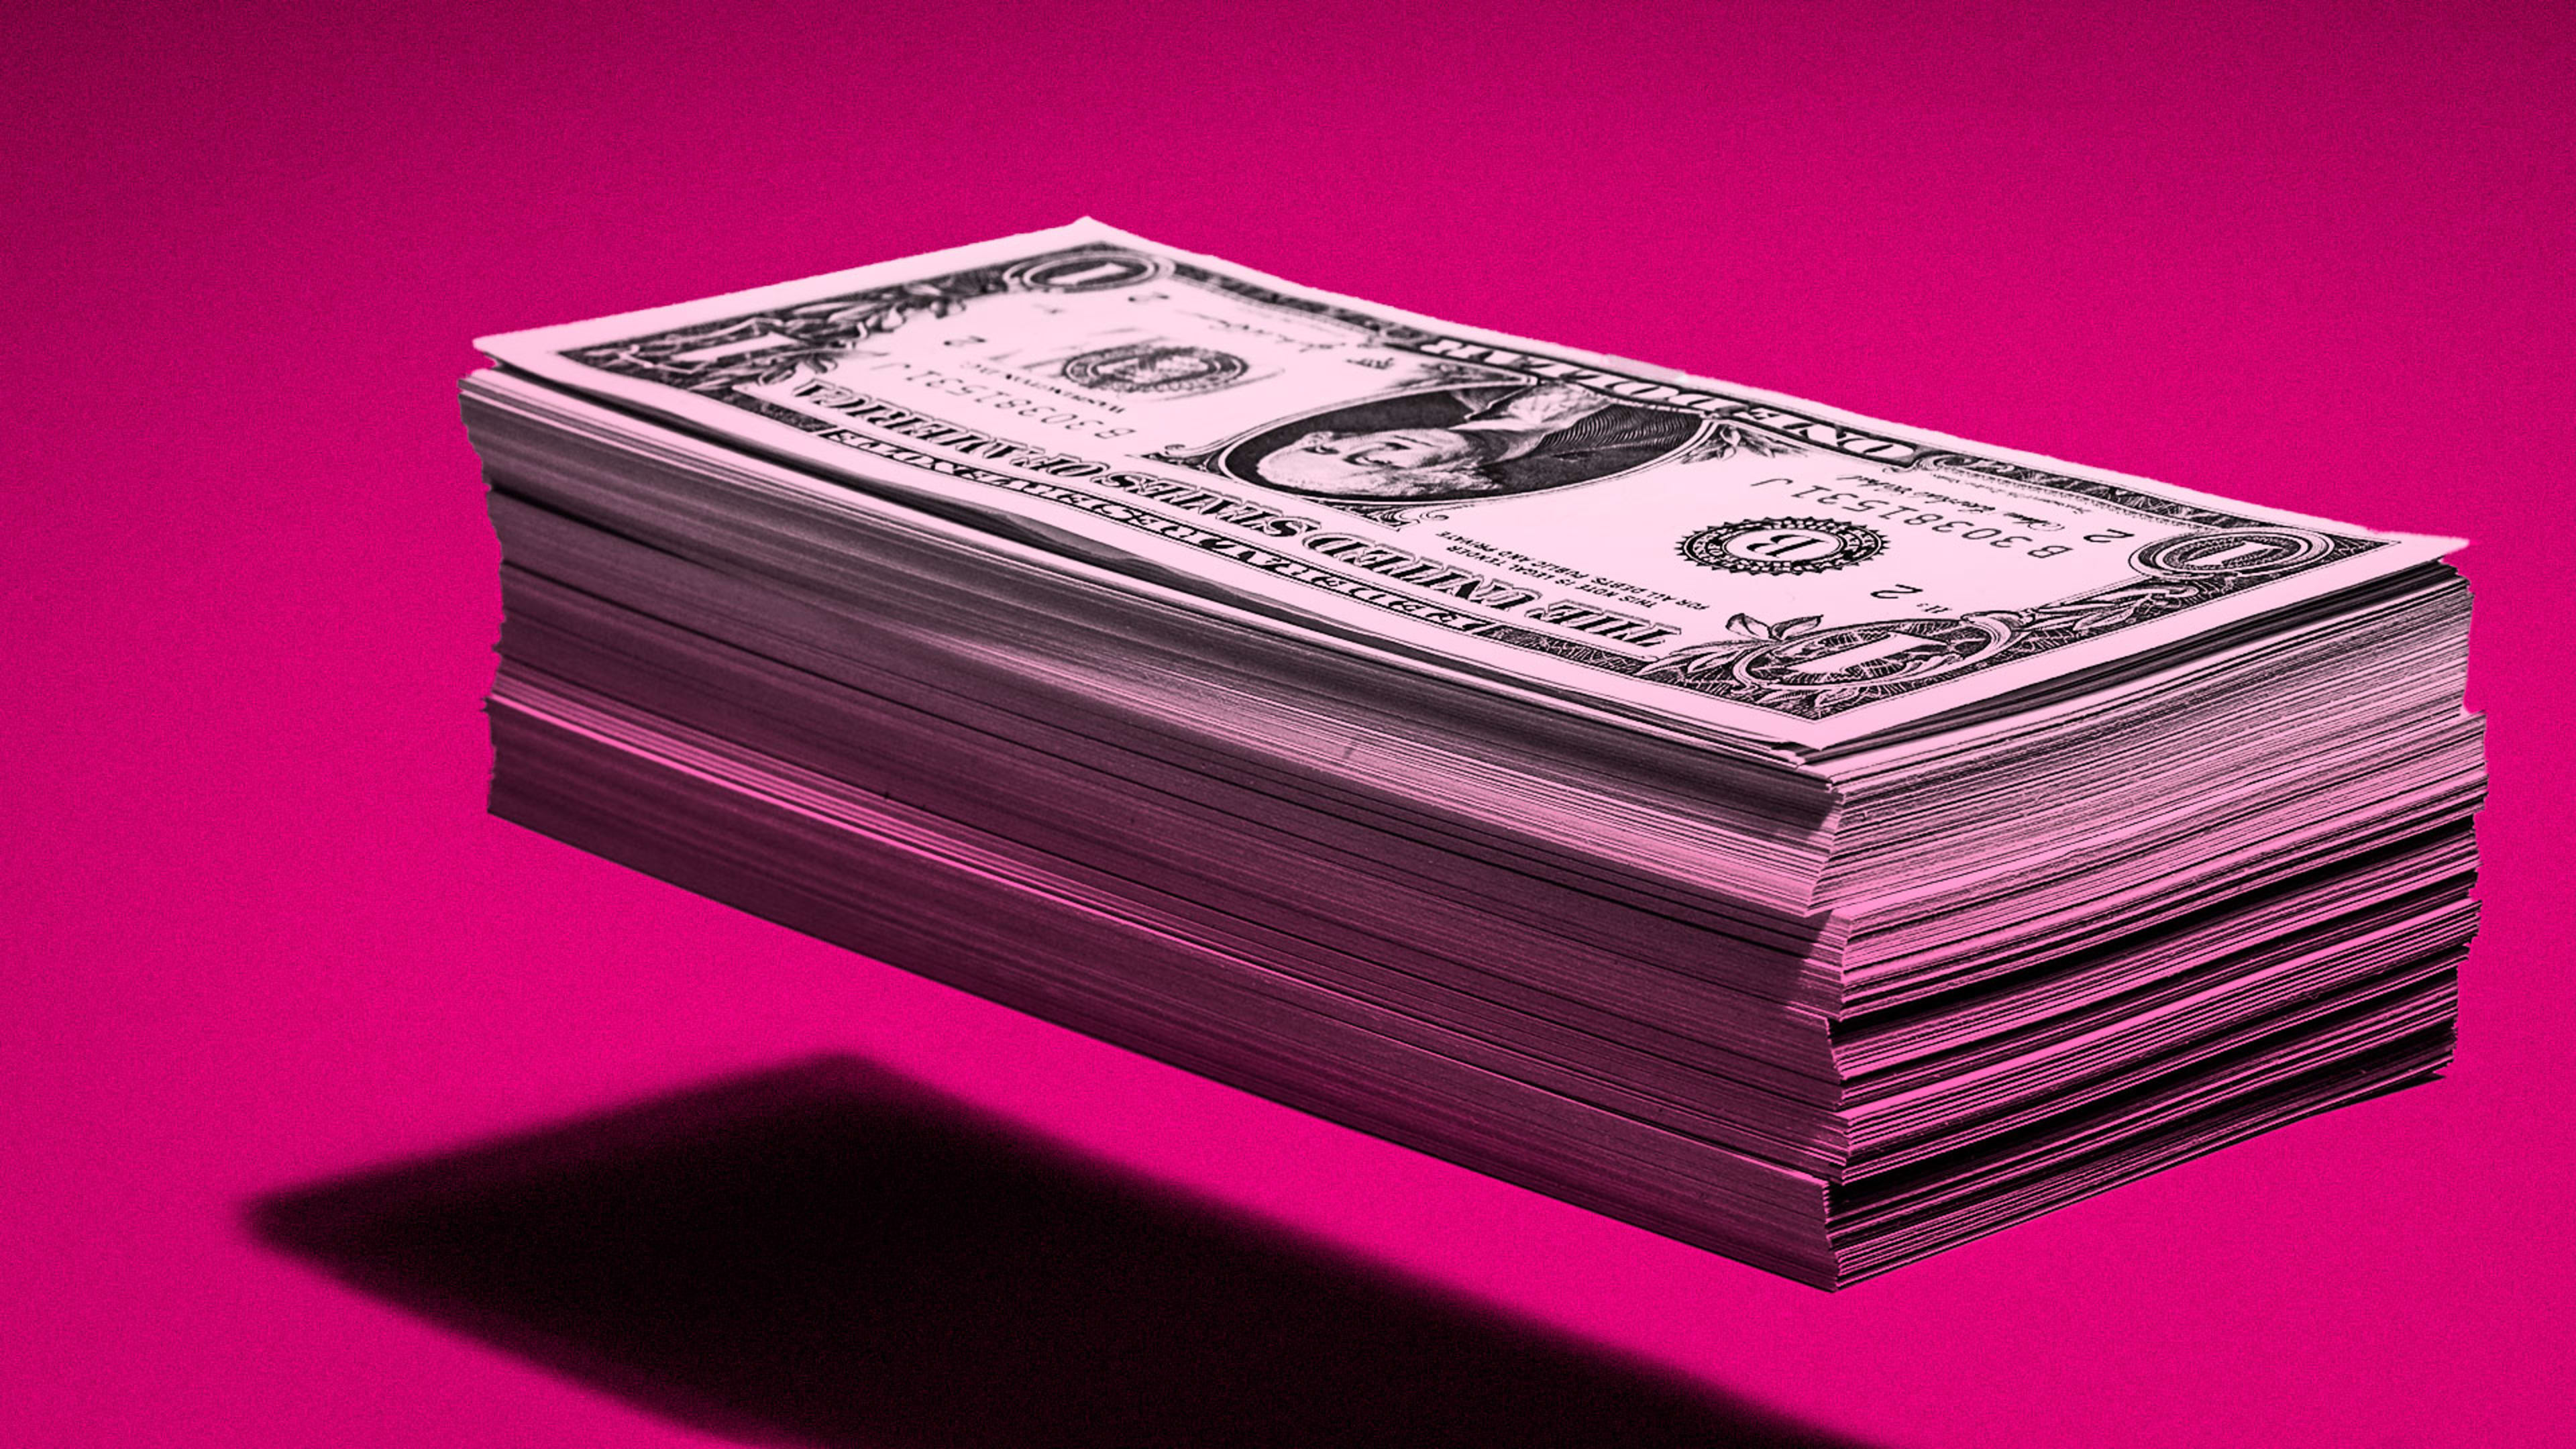 T-Mobile might owe you money: Here’s what to know about the data breach lawsuit settlement